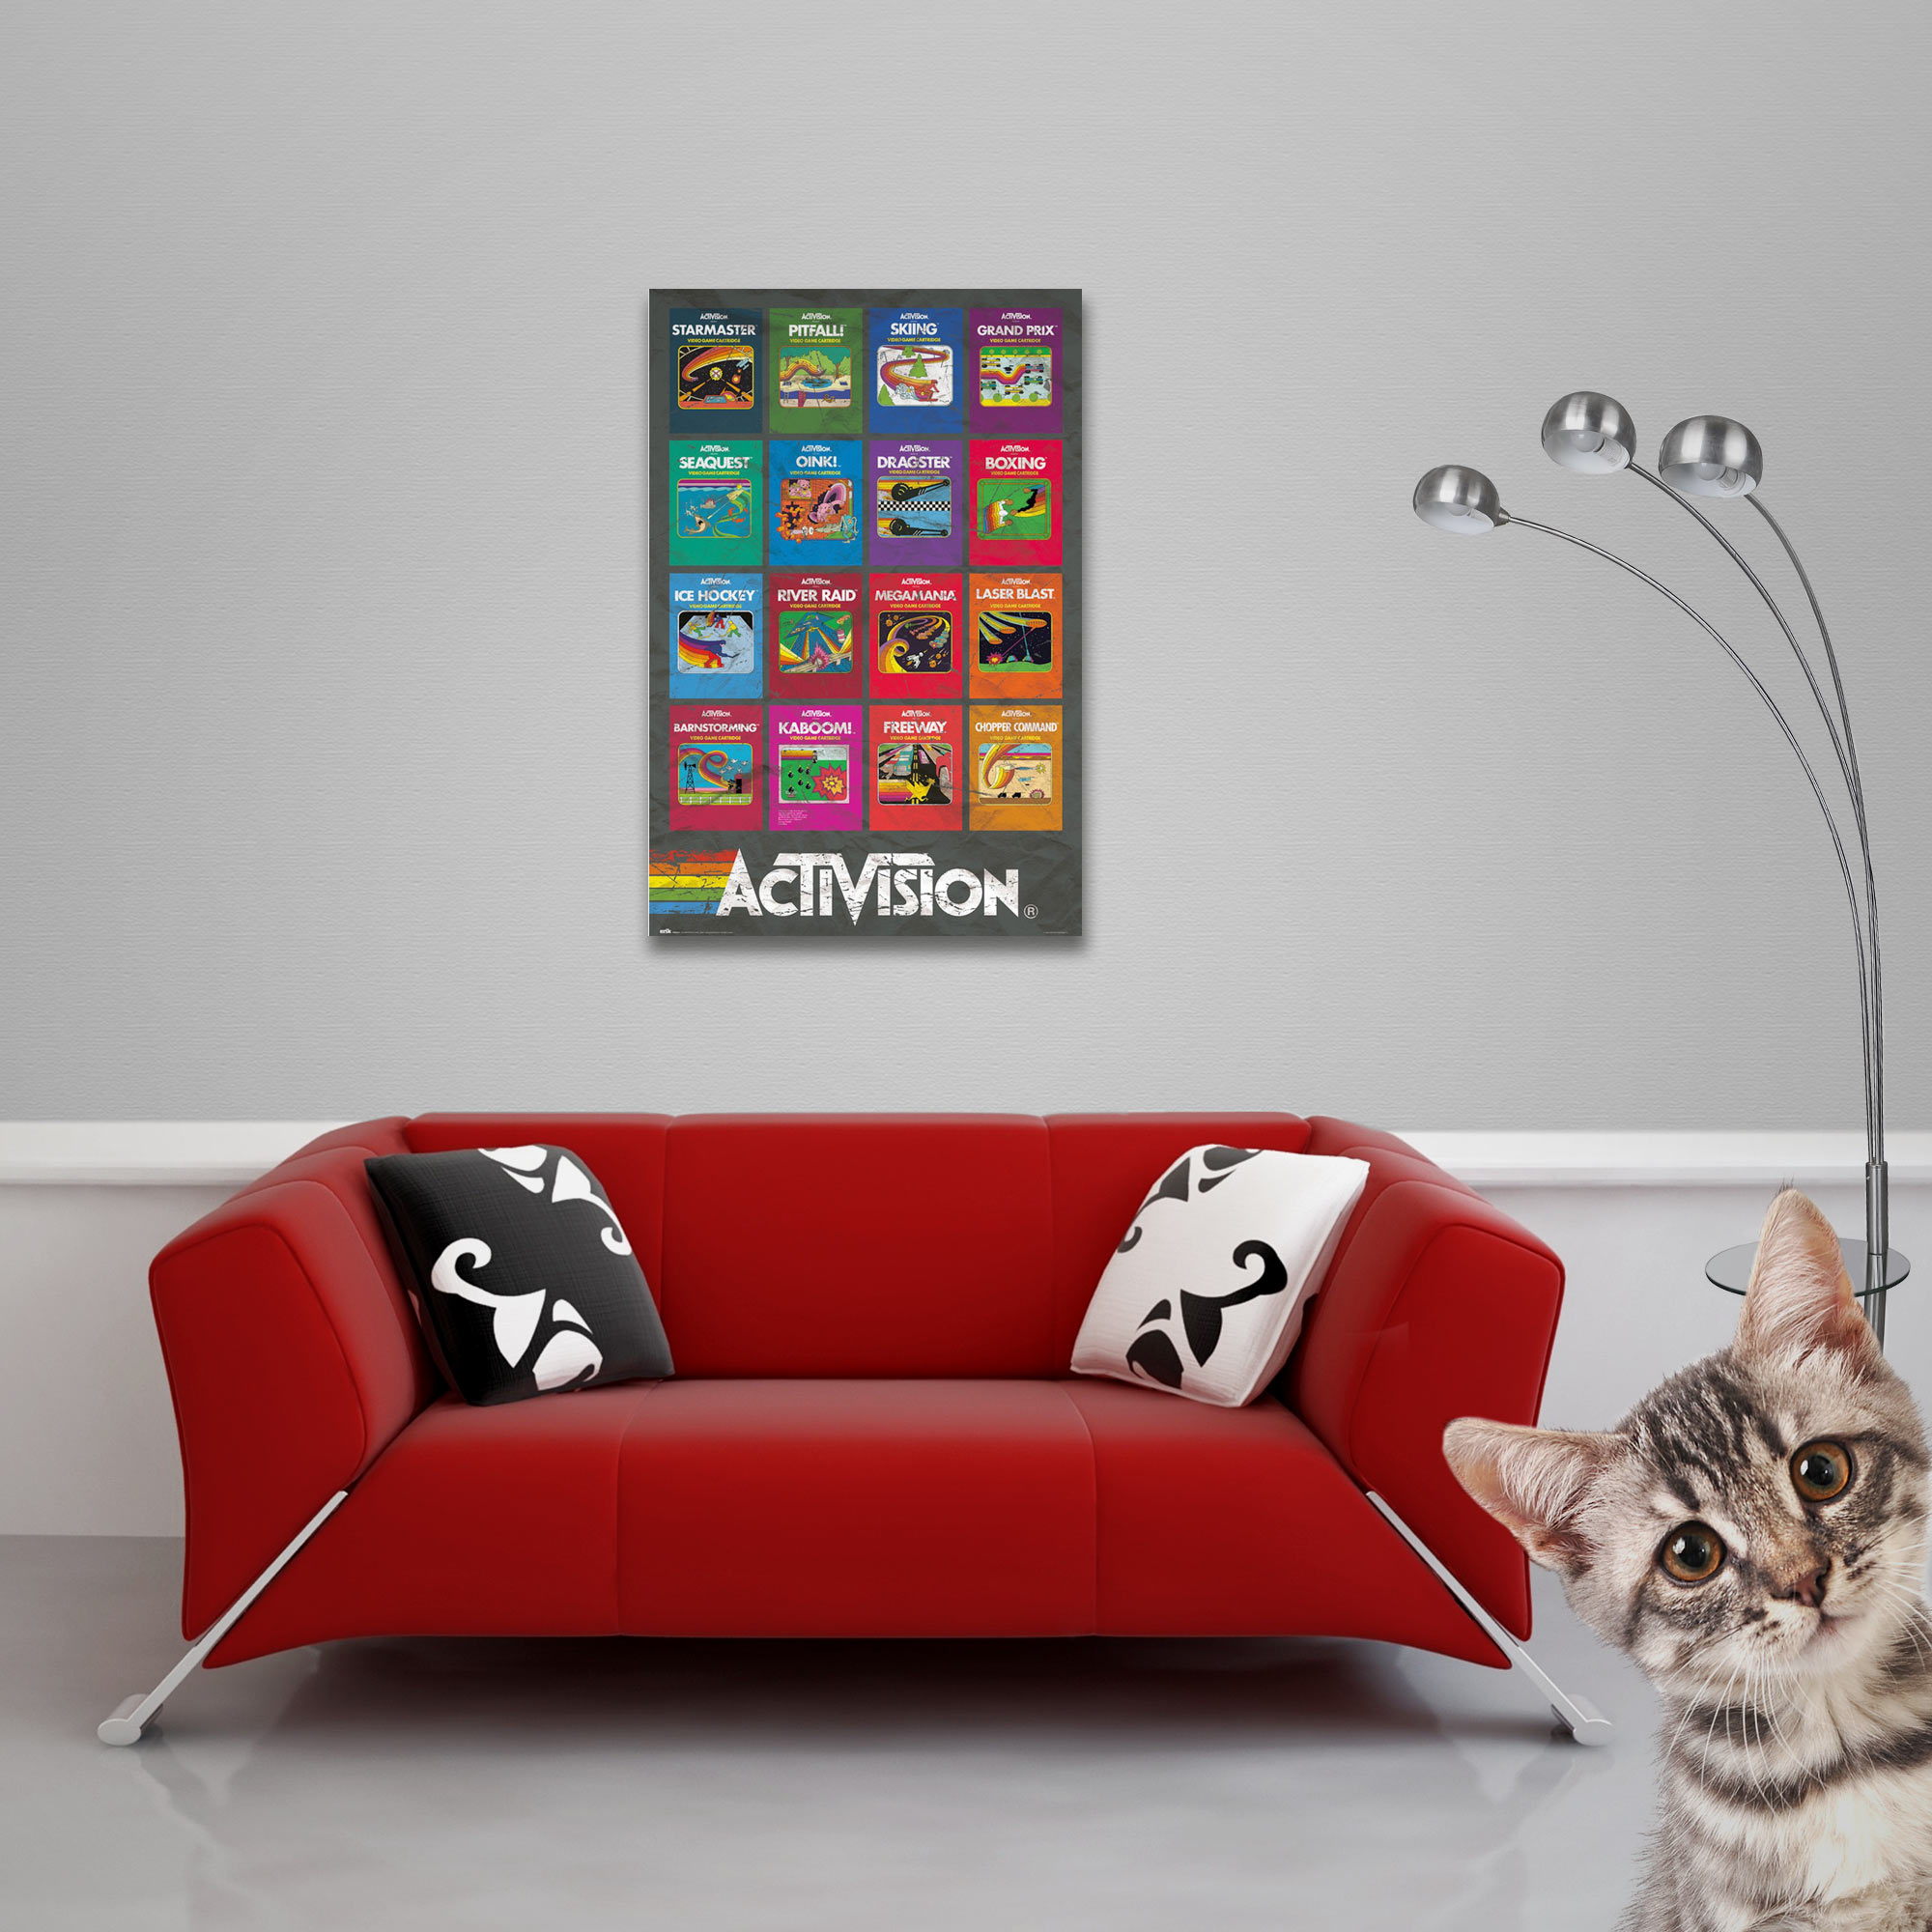 Activision - Game Covers